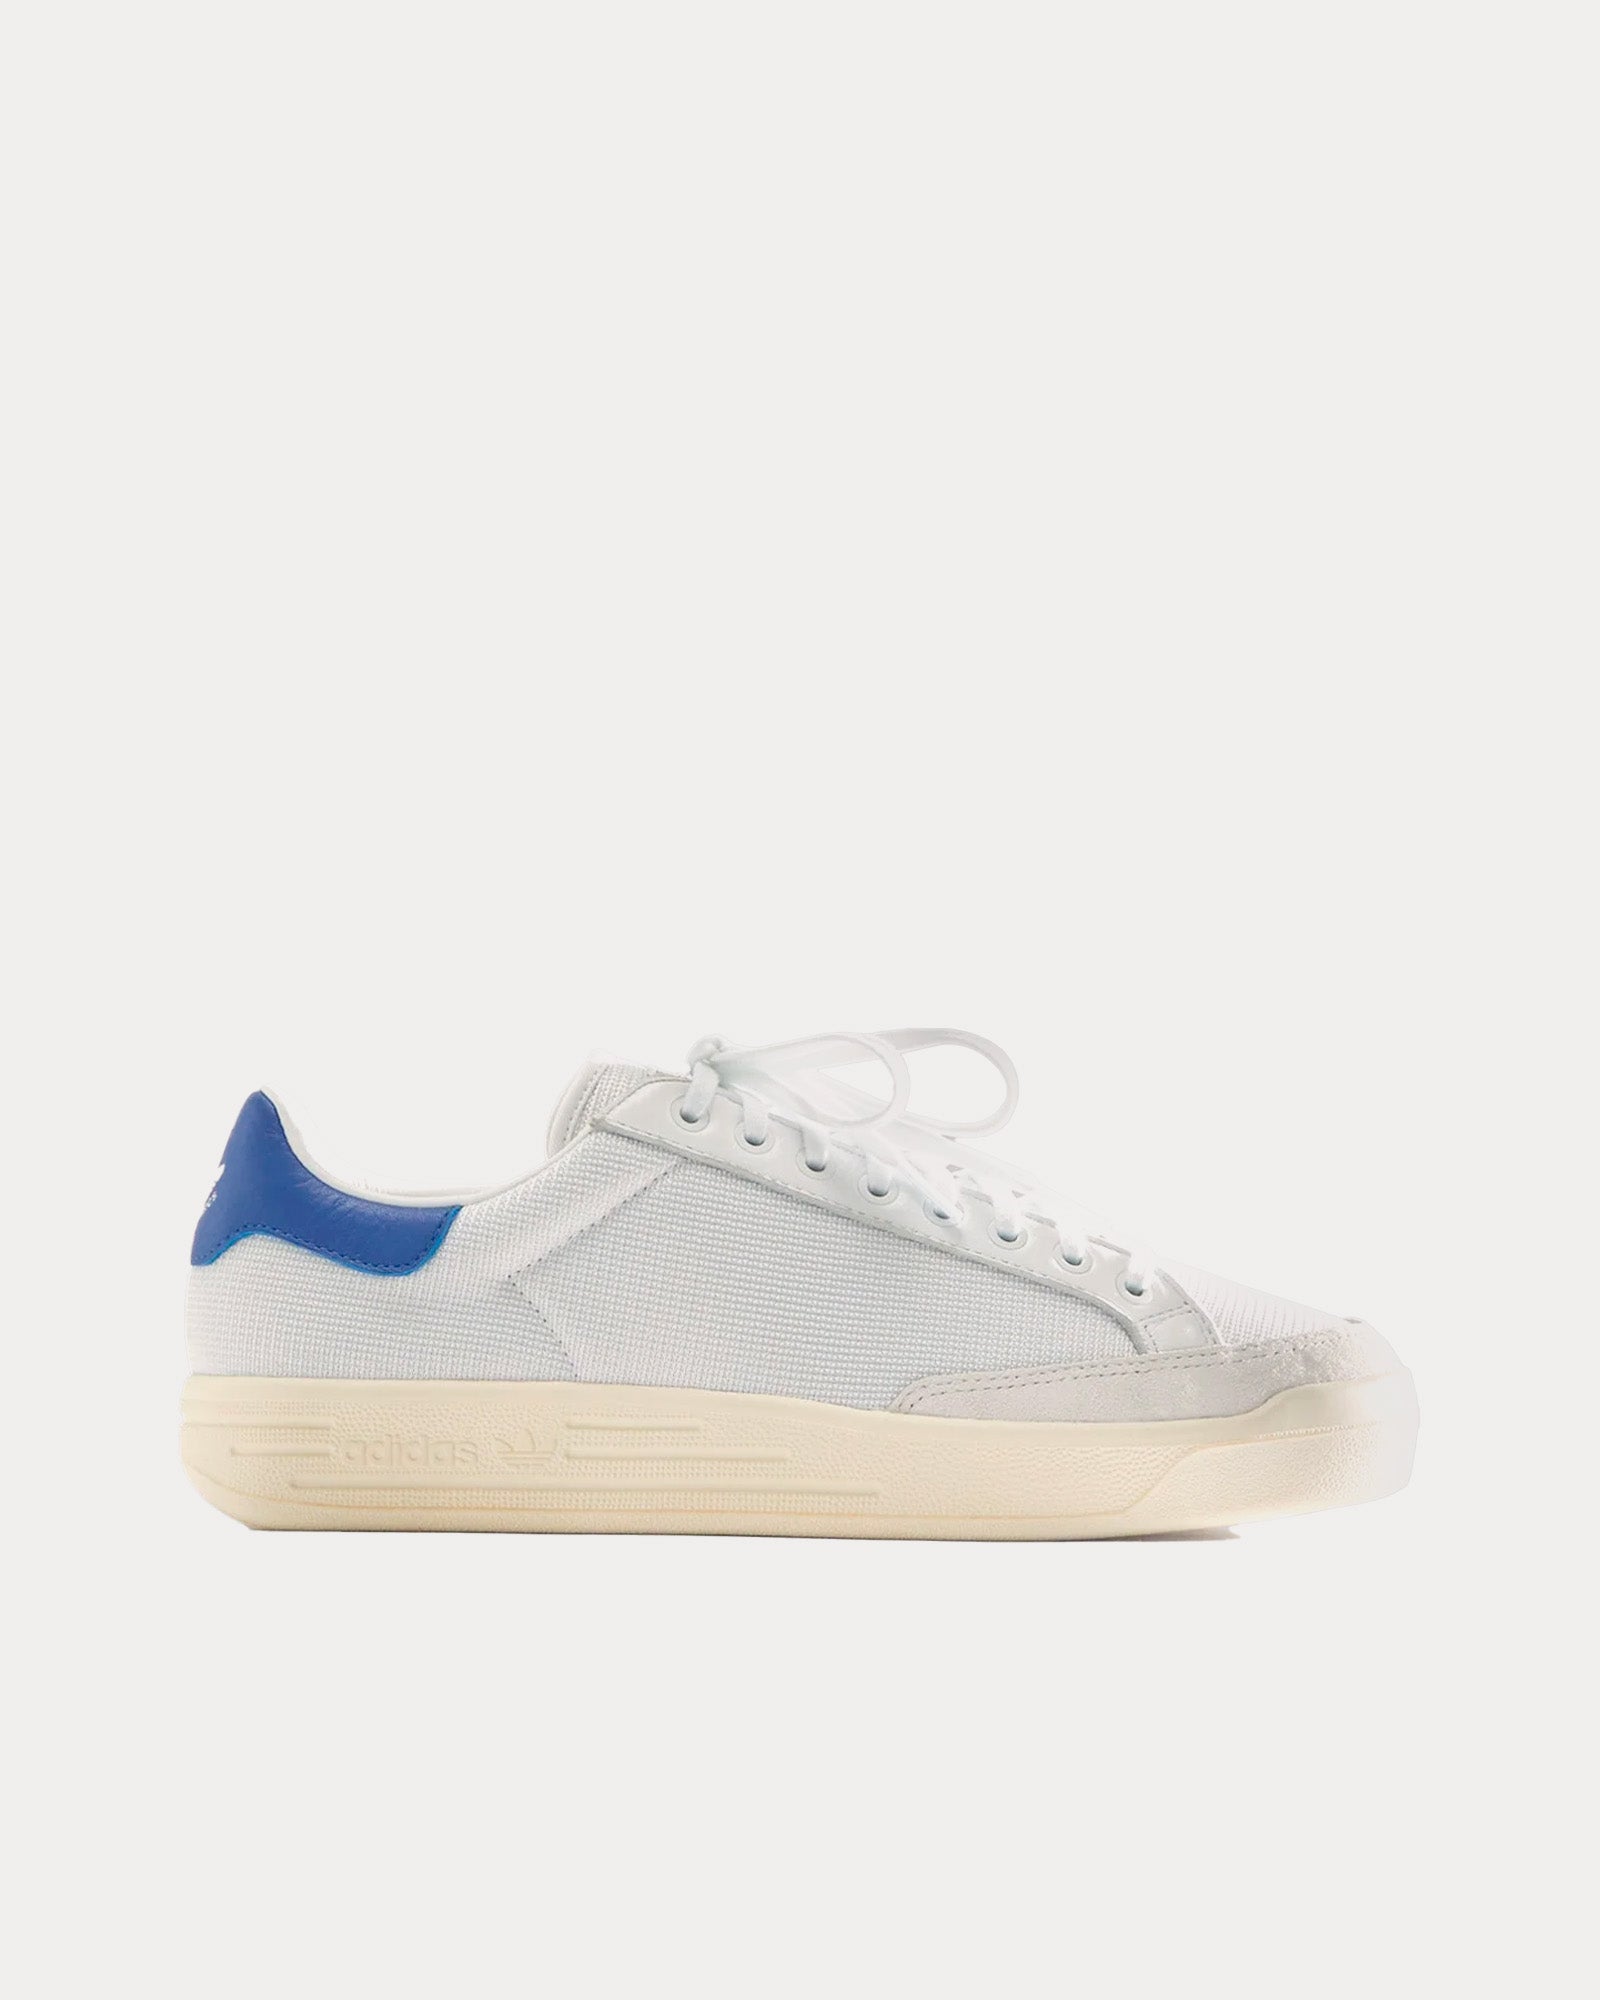 Adidas x Kith - Rod Laver Crystal White / Royal Low Top Sneakers